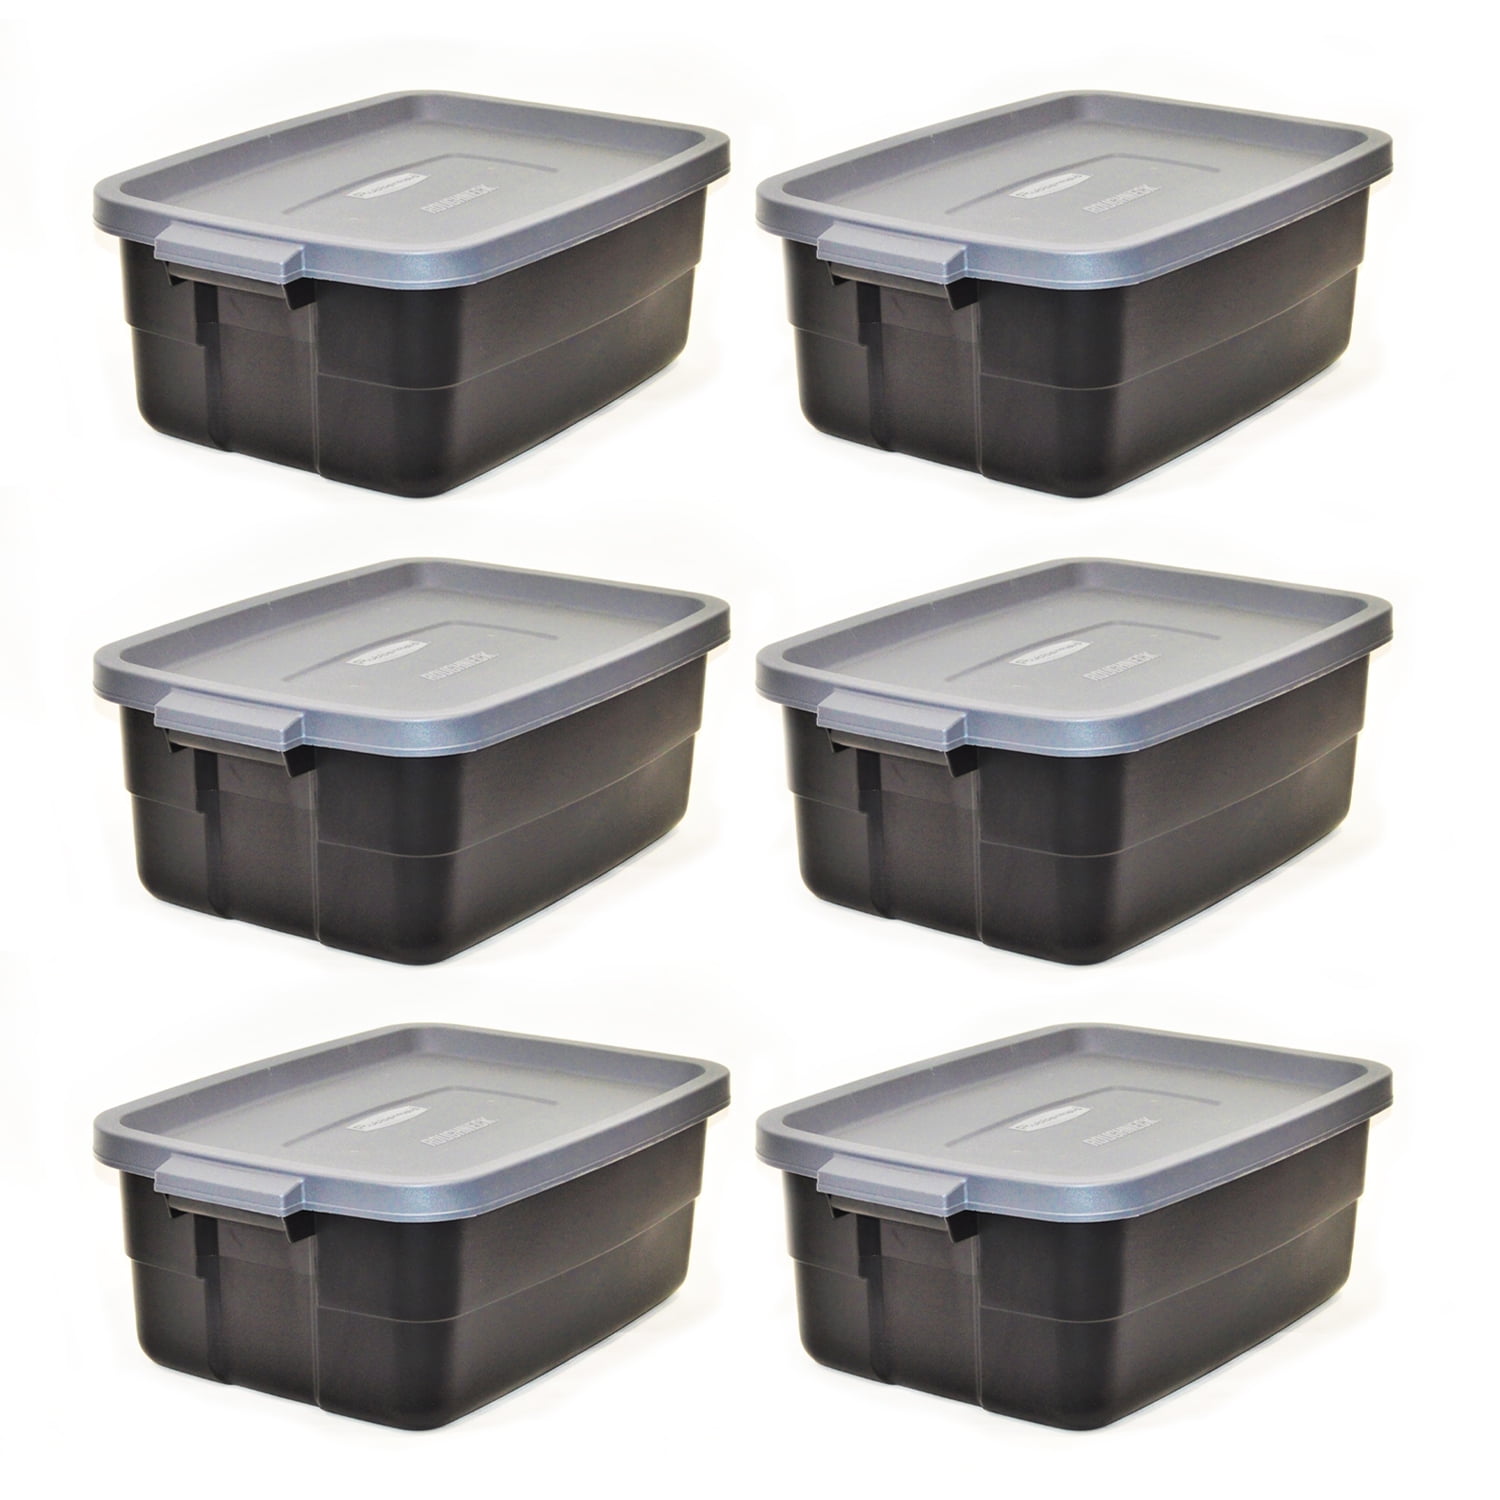 Hefty 18 gal Max Pro Plastic Utility Storage Tote, Gray, 6 Pack